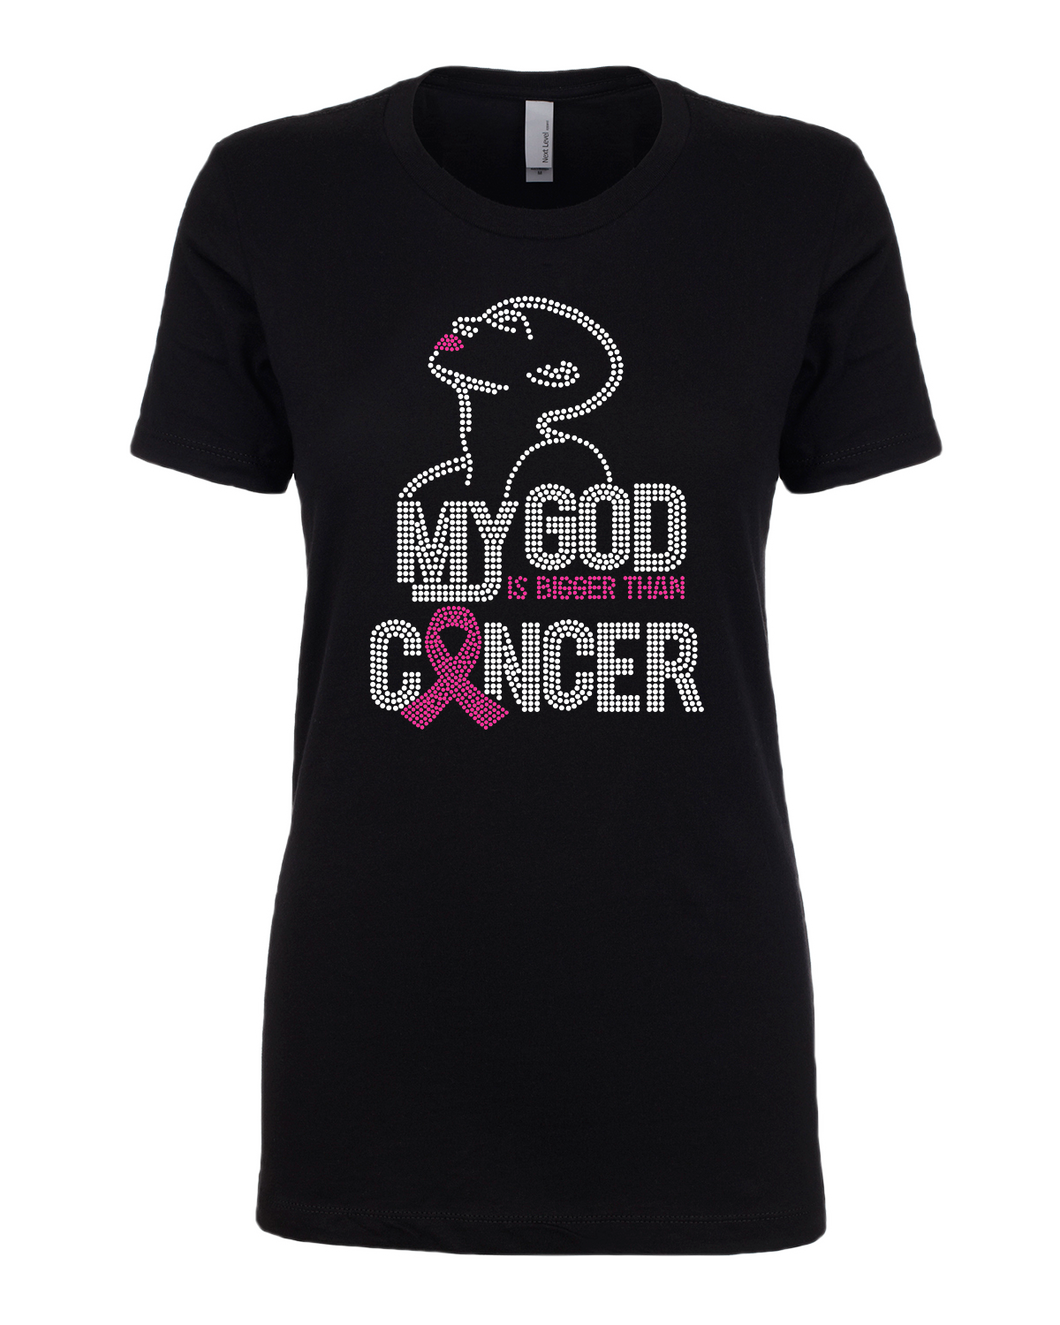 Awareness - My GOD is Bigger than Cancer